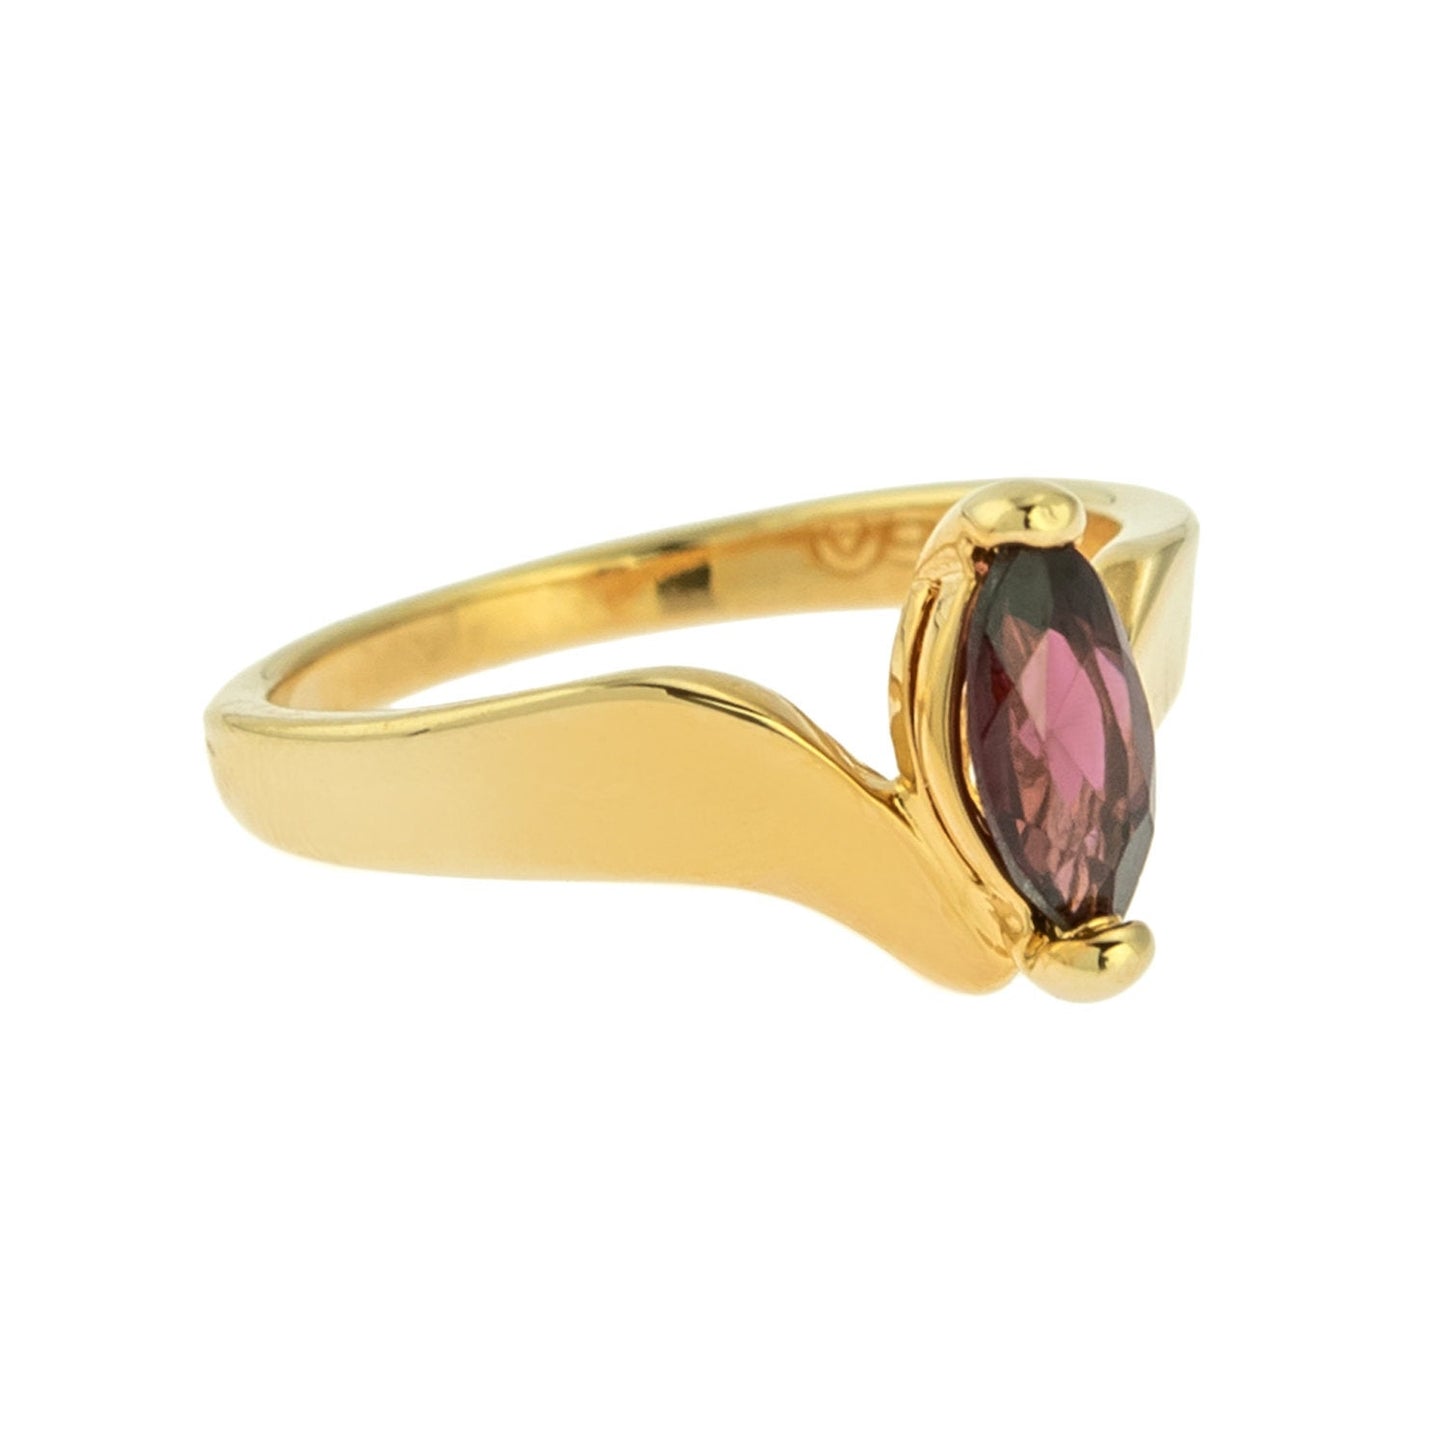 Vintage 1970's Genuine Garnet 18k Yellow Gold Electroplated Ring Made in USA Size: 6